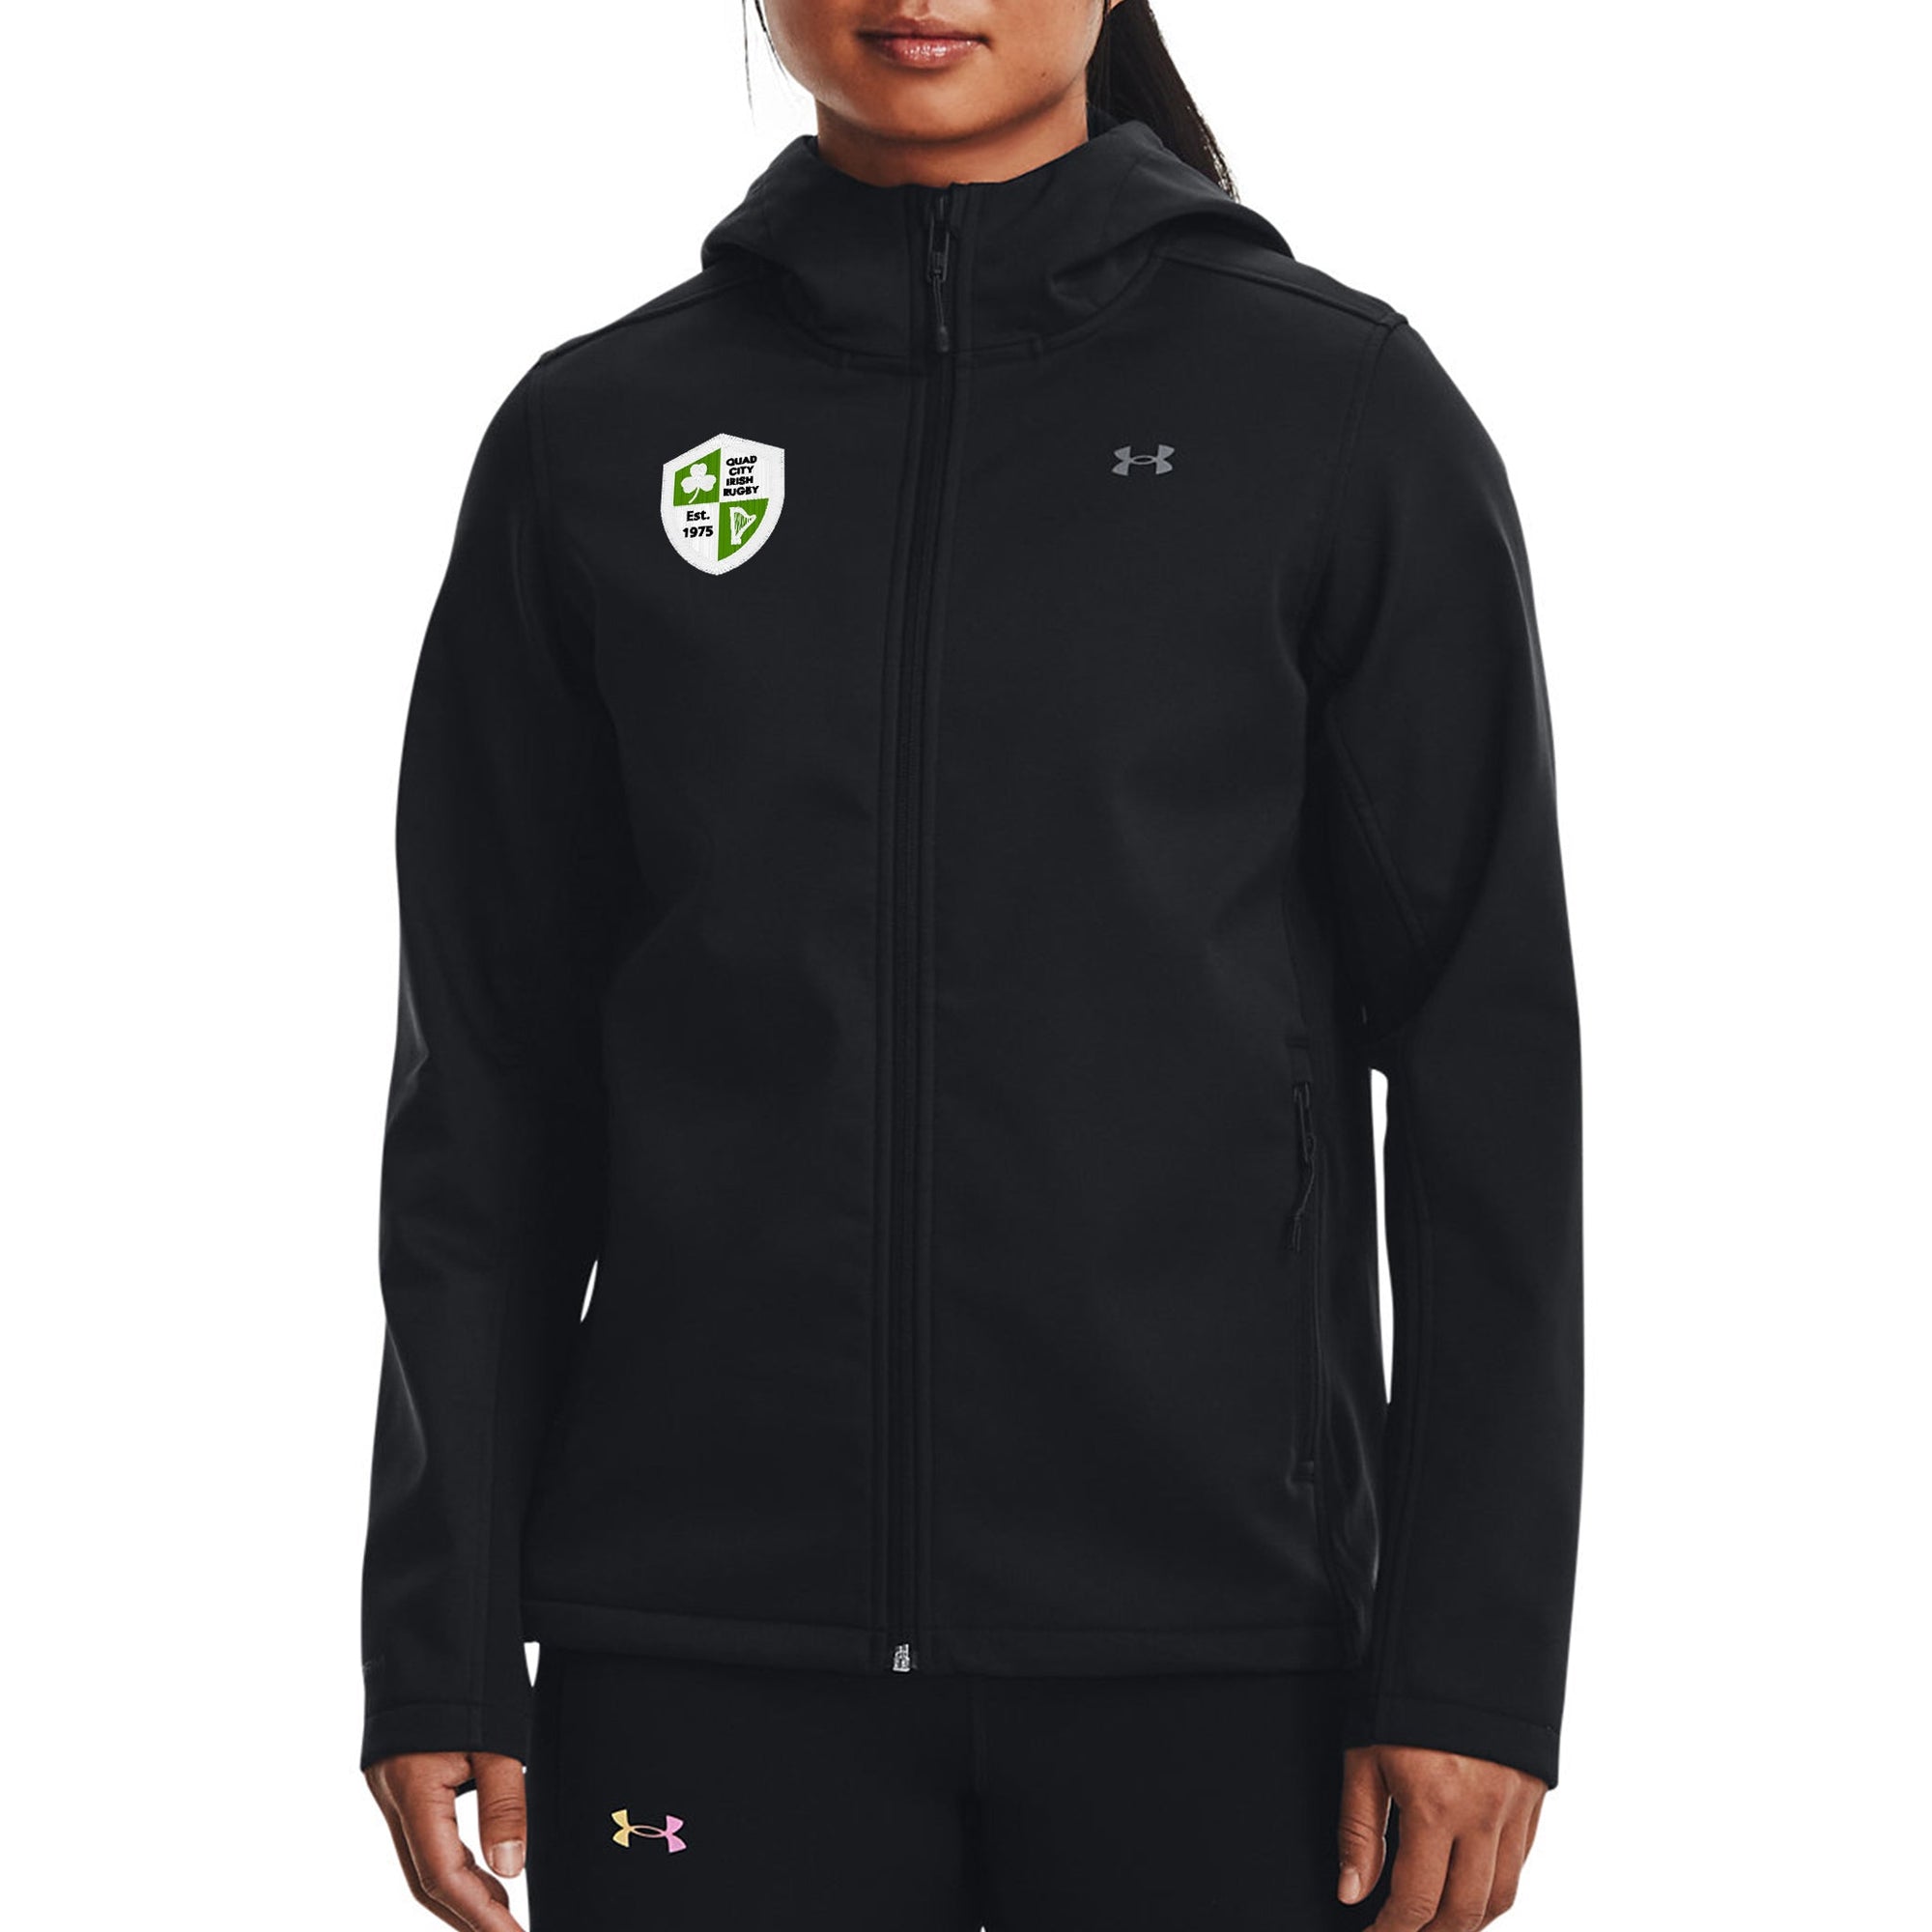 Rugby Imports Quad City Irish Women's Coldgear Hooded Infrared Jacket